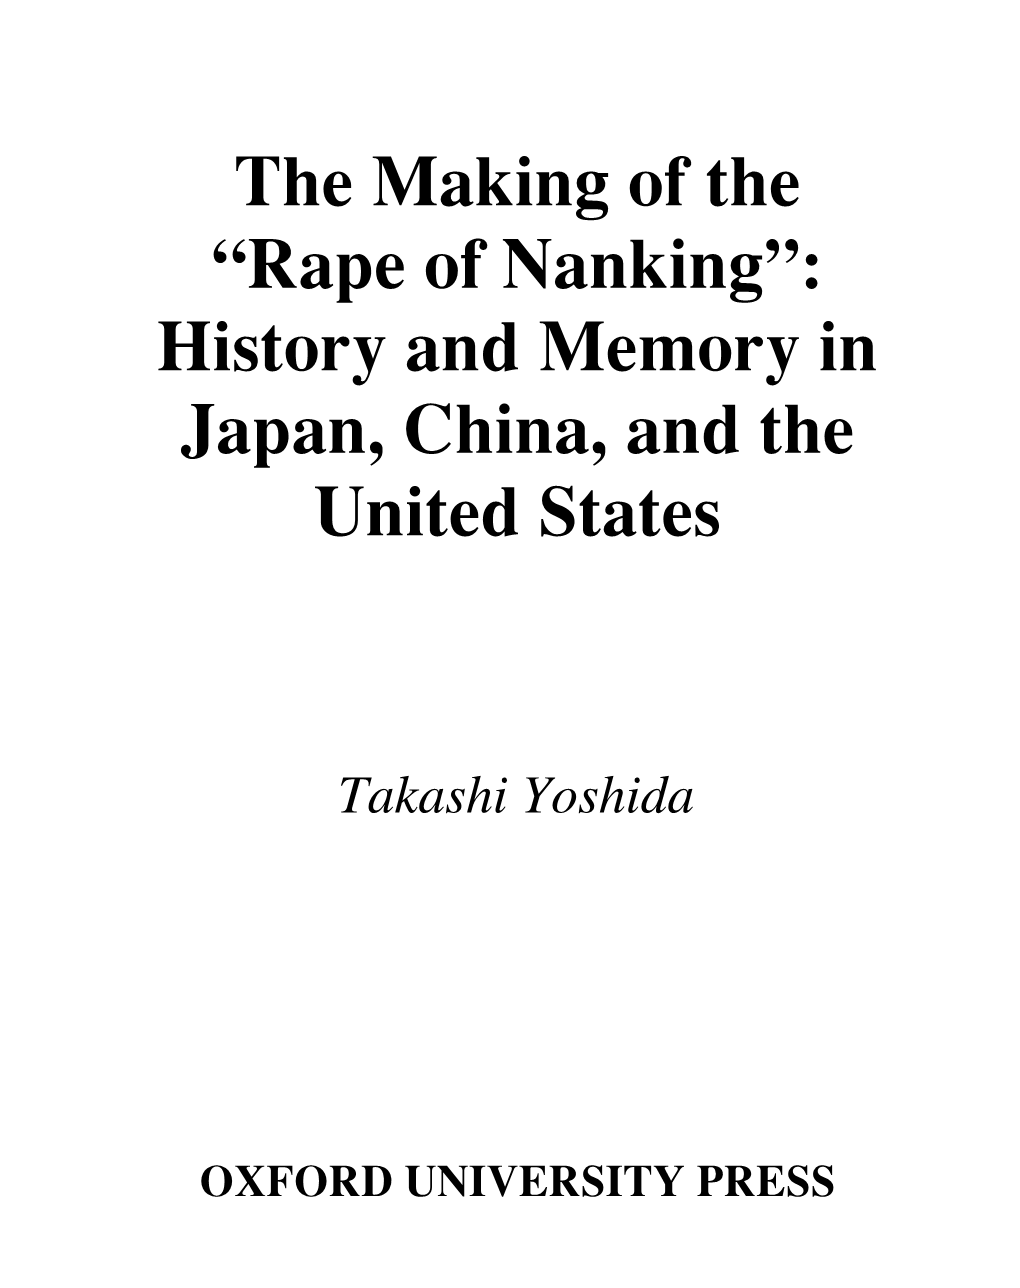 Rape of Nanking”: History and Memory in Japan, China, and the United States